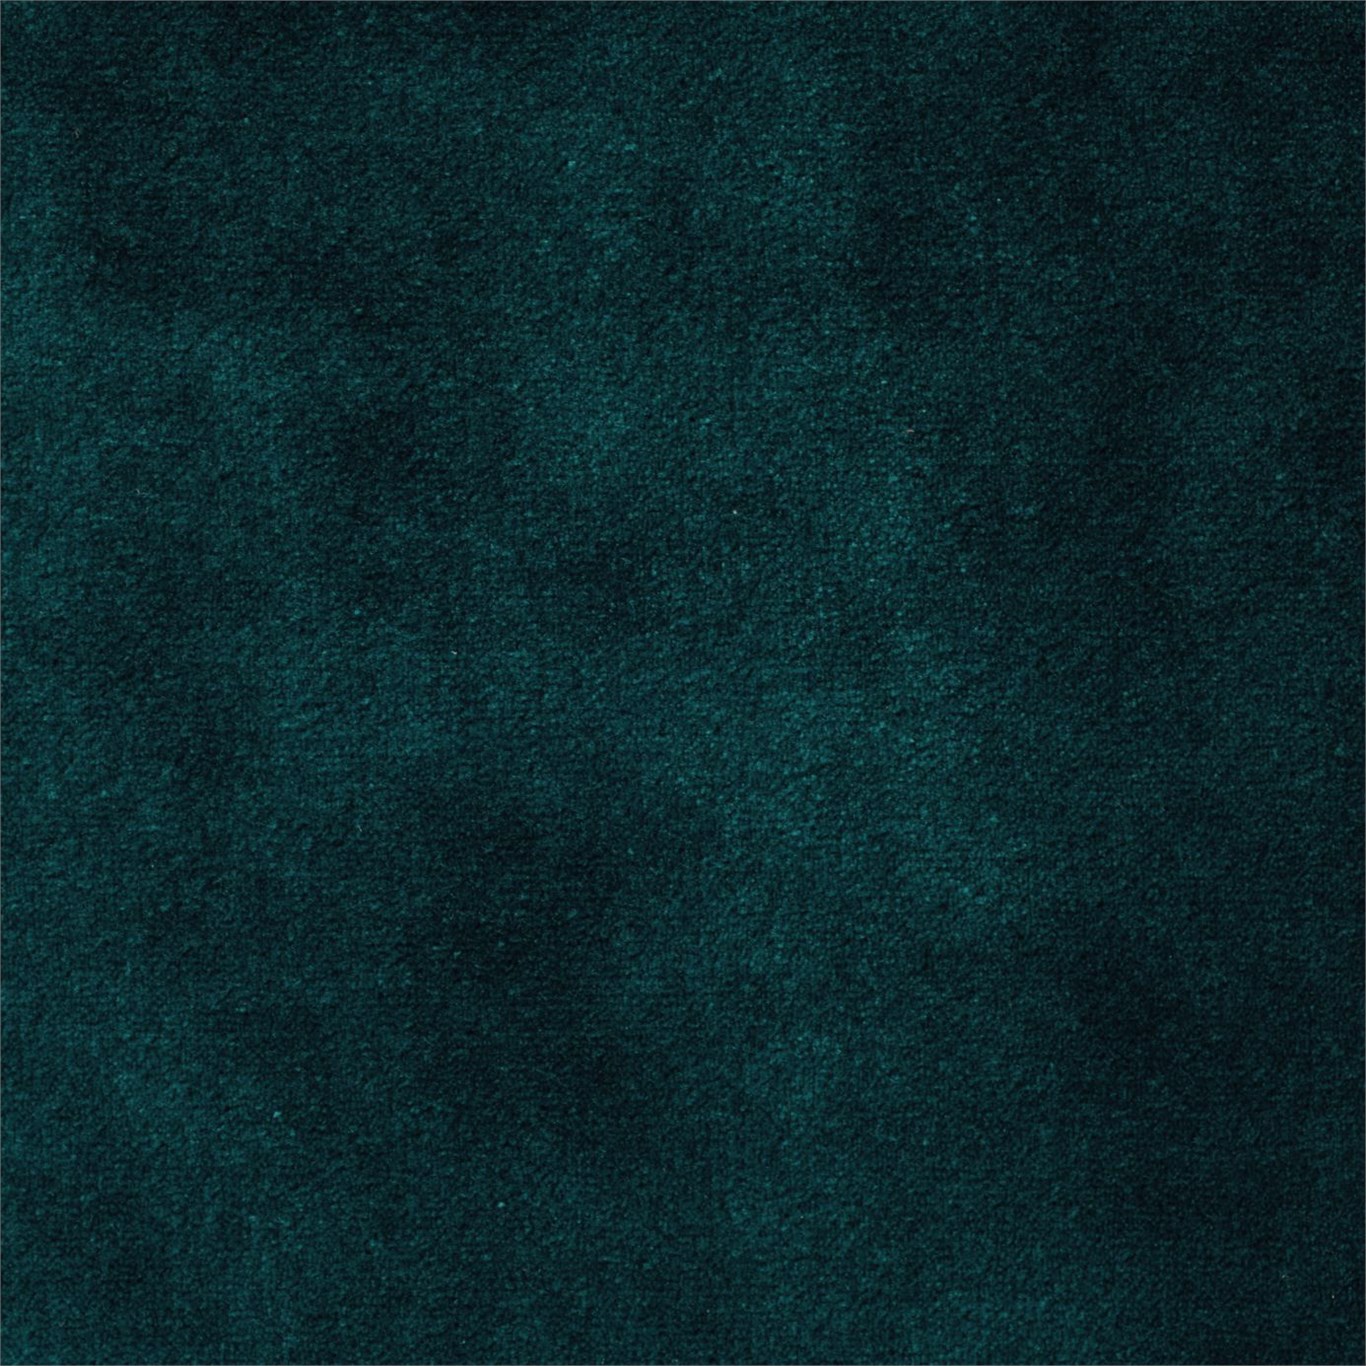 Anthology Veda Teal Fabric by HAR